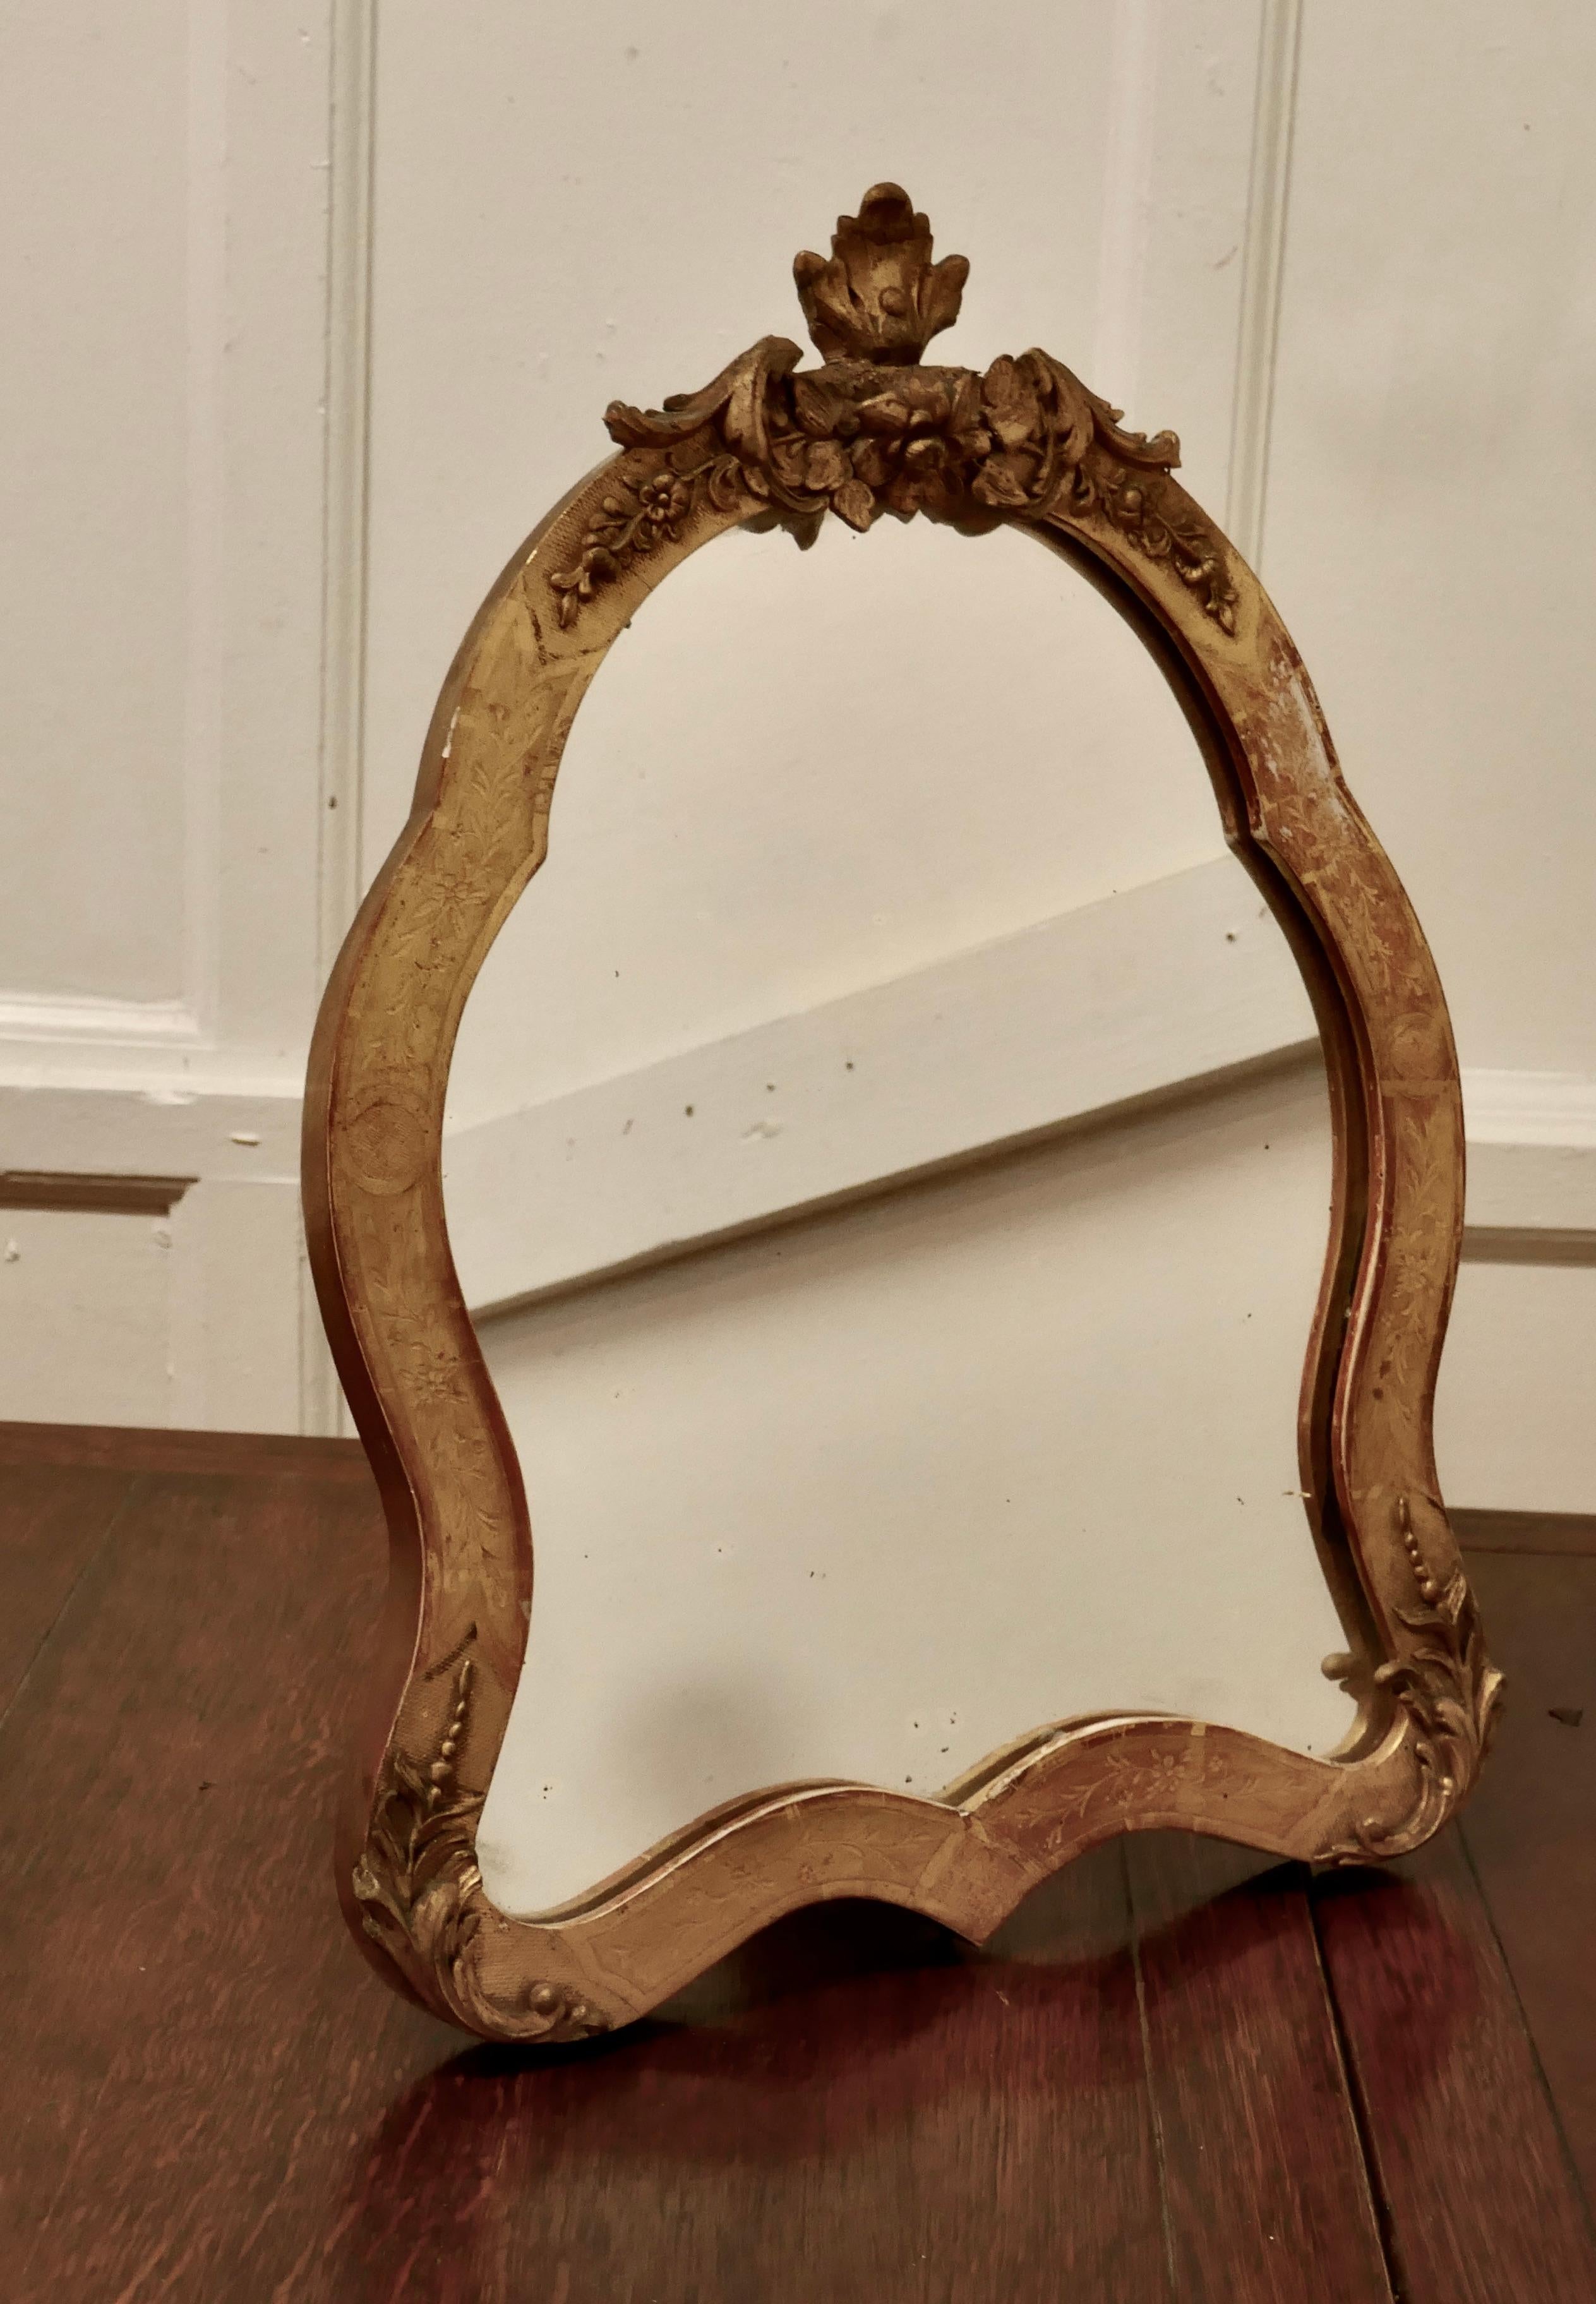 French Giltdressing table and wall mirror

A very pretty piece in Gilt with a shield shape, the really unusual thing about this lovely mirror is that it comes with the ability to be wall hung or slide out the easel stand to use as a dressing